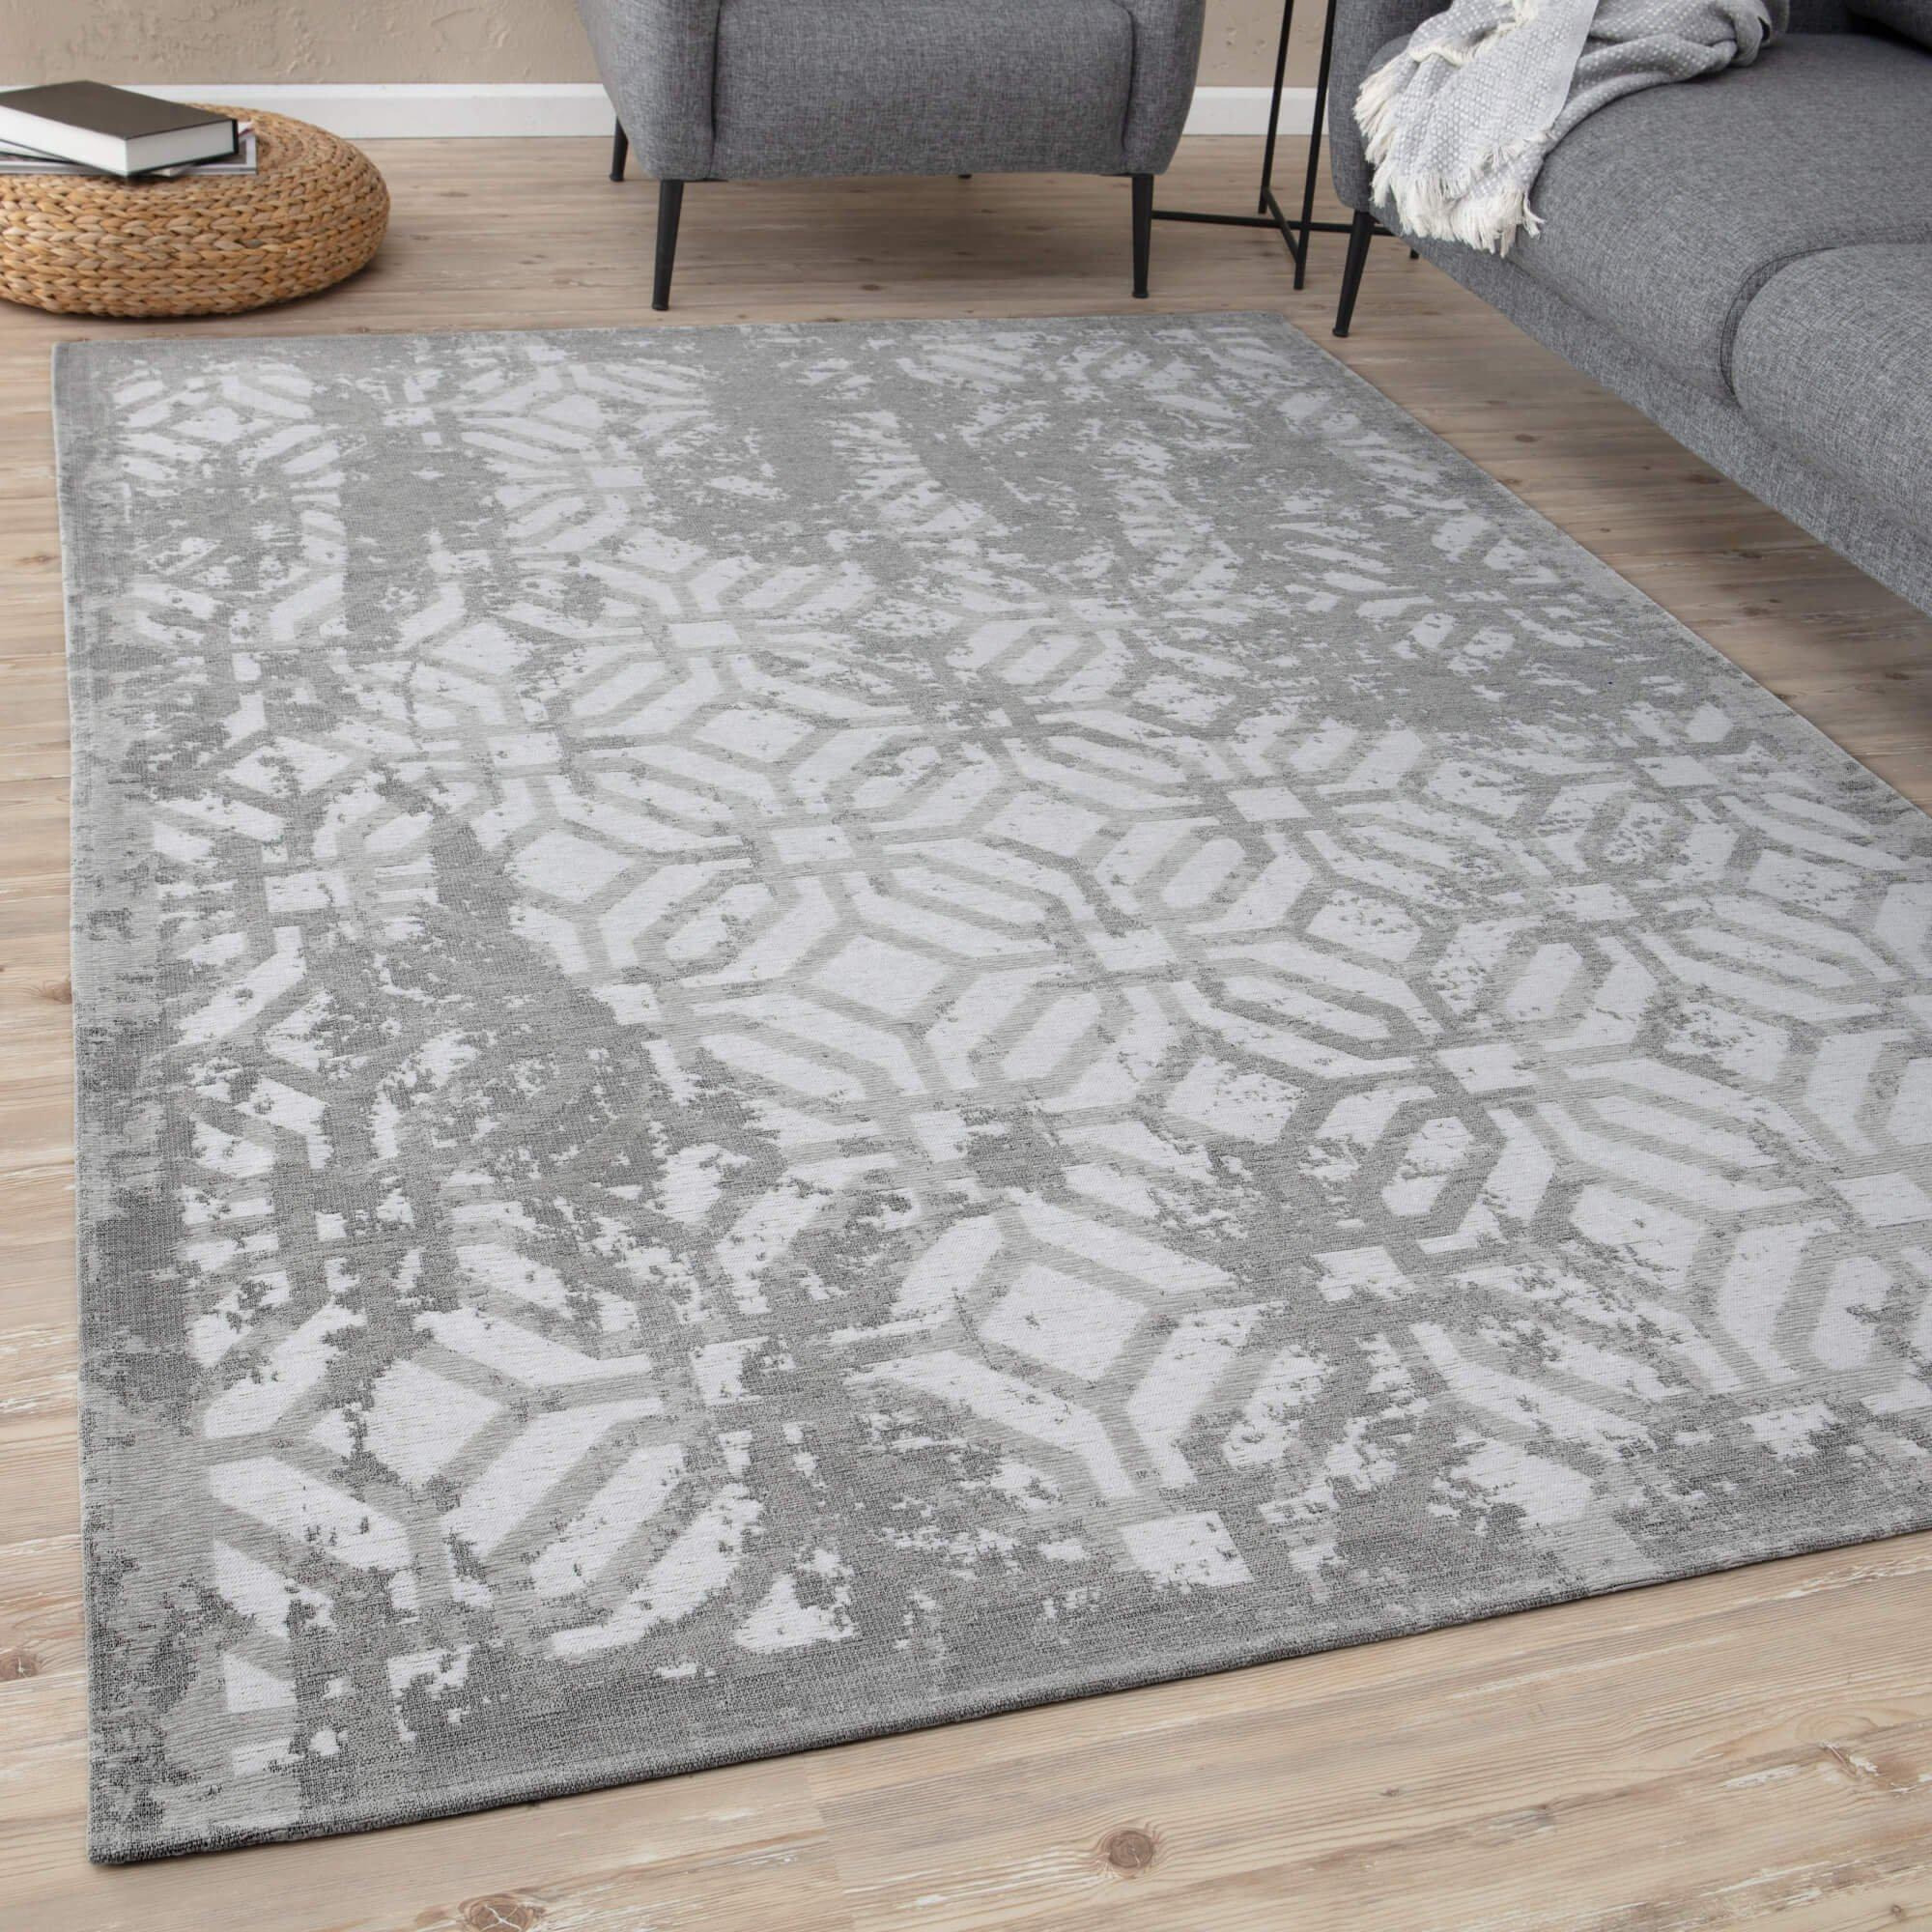 Carina Collection Modern Washable Rugs in Grey - 6932 - image 1